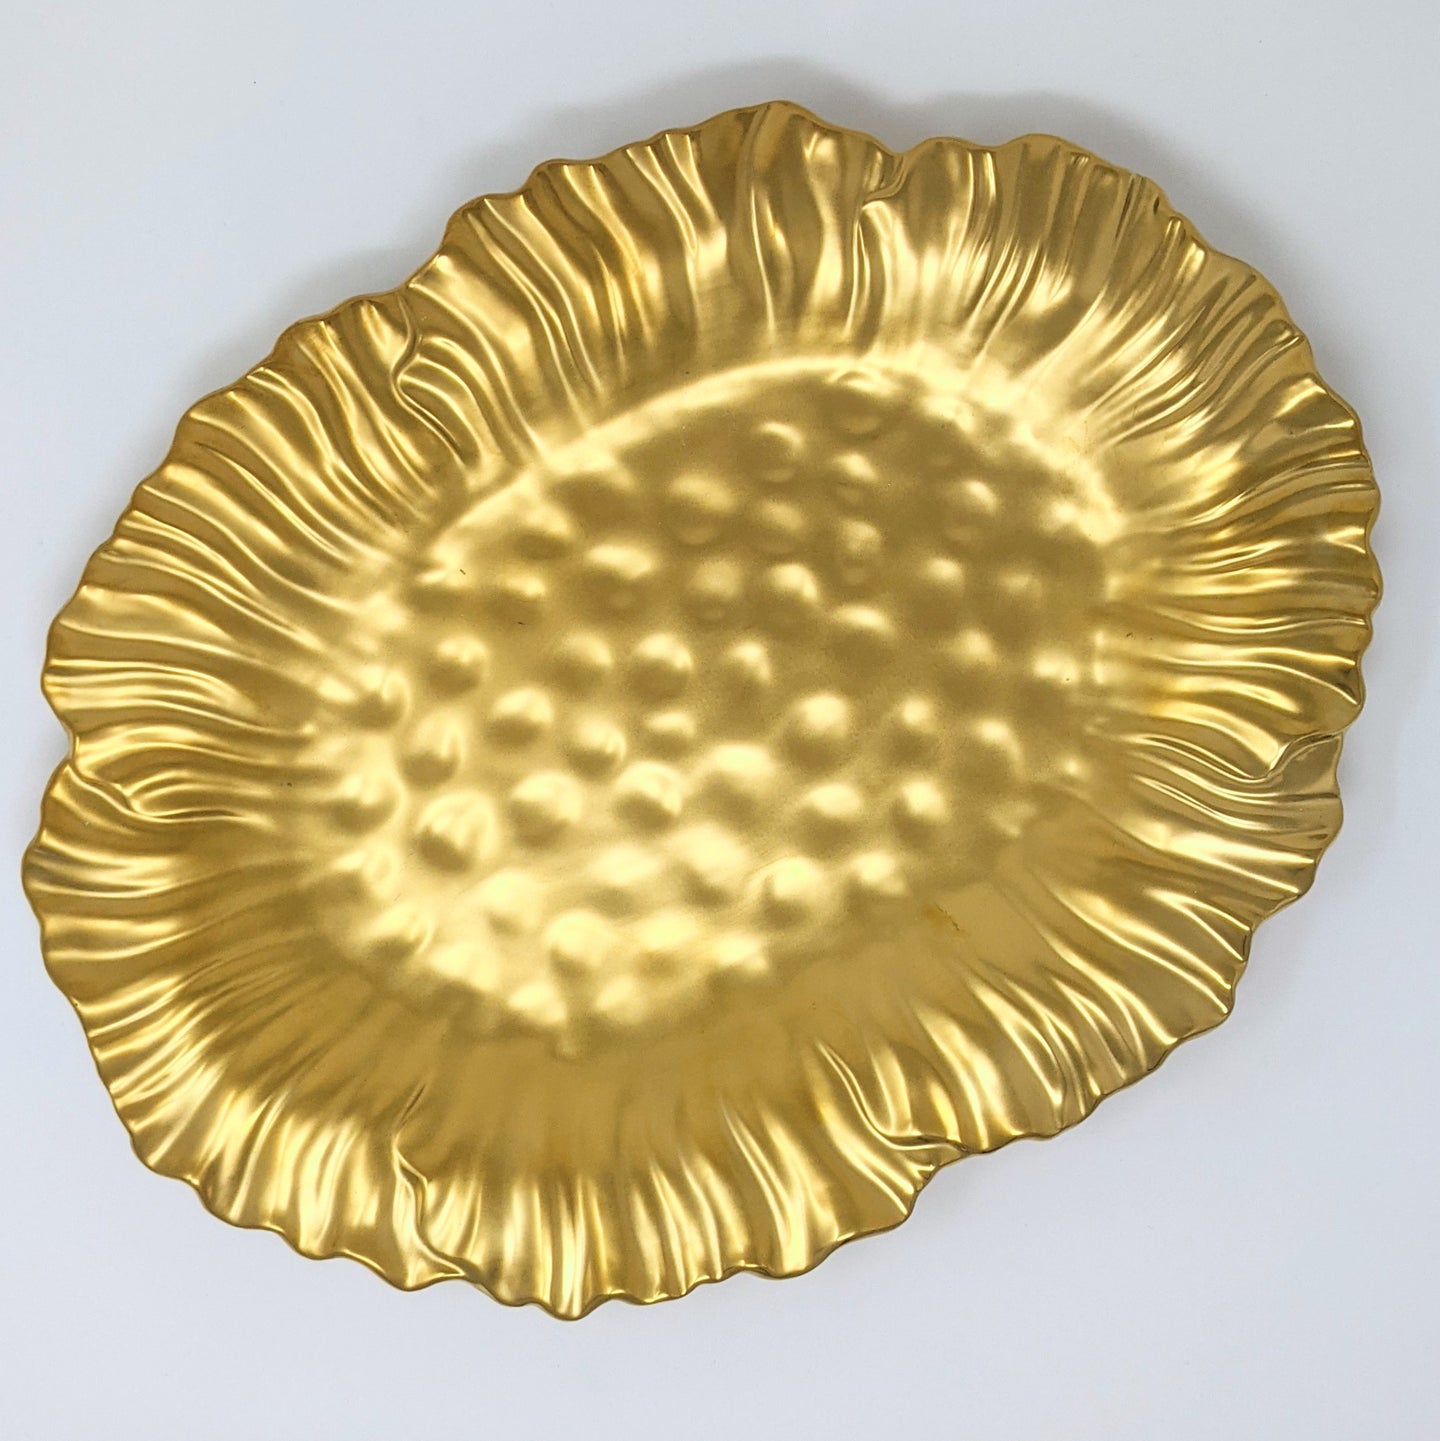 Fable Jardin D'or Oval Tray